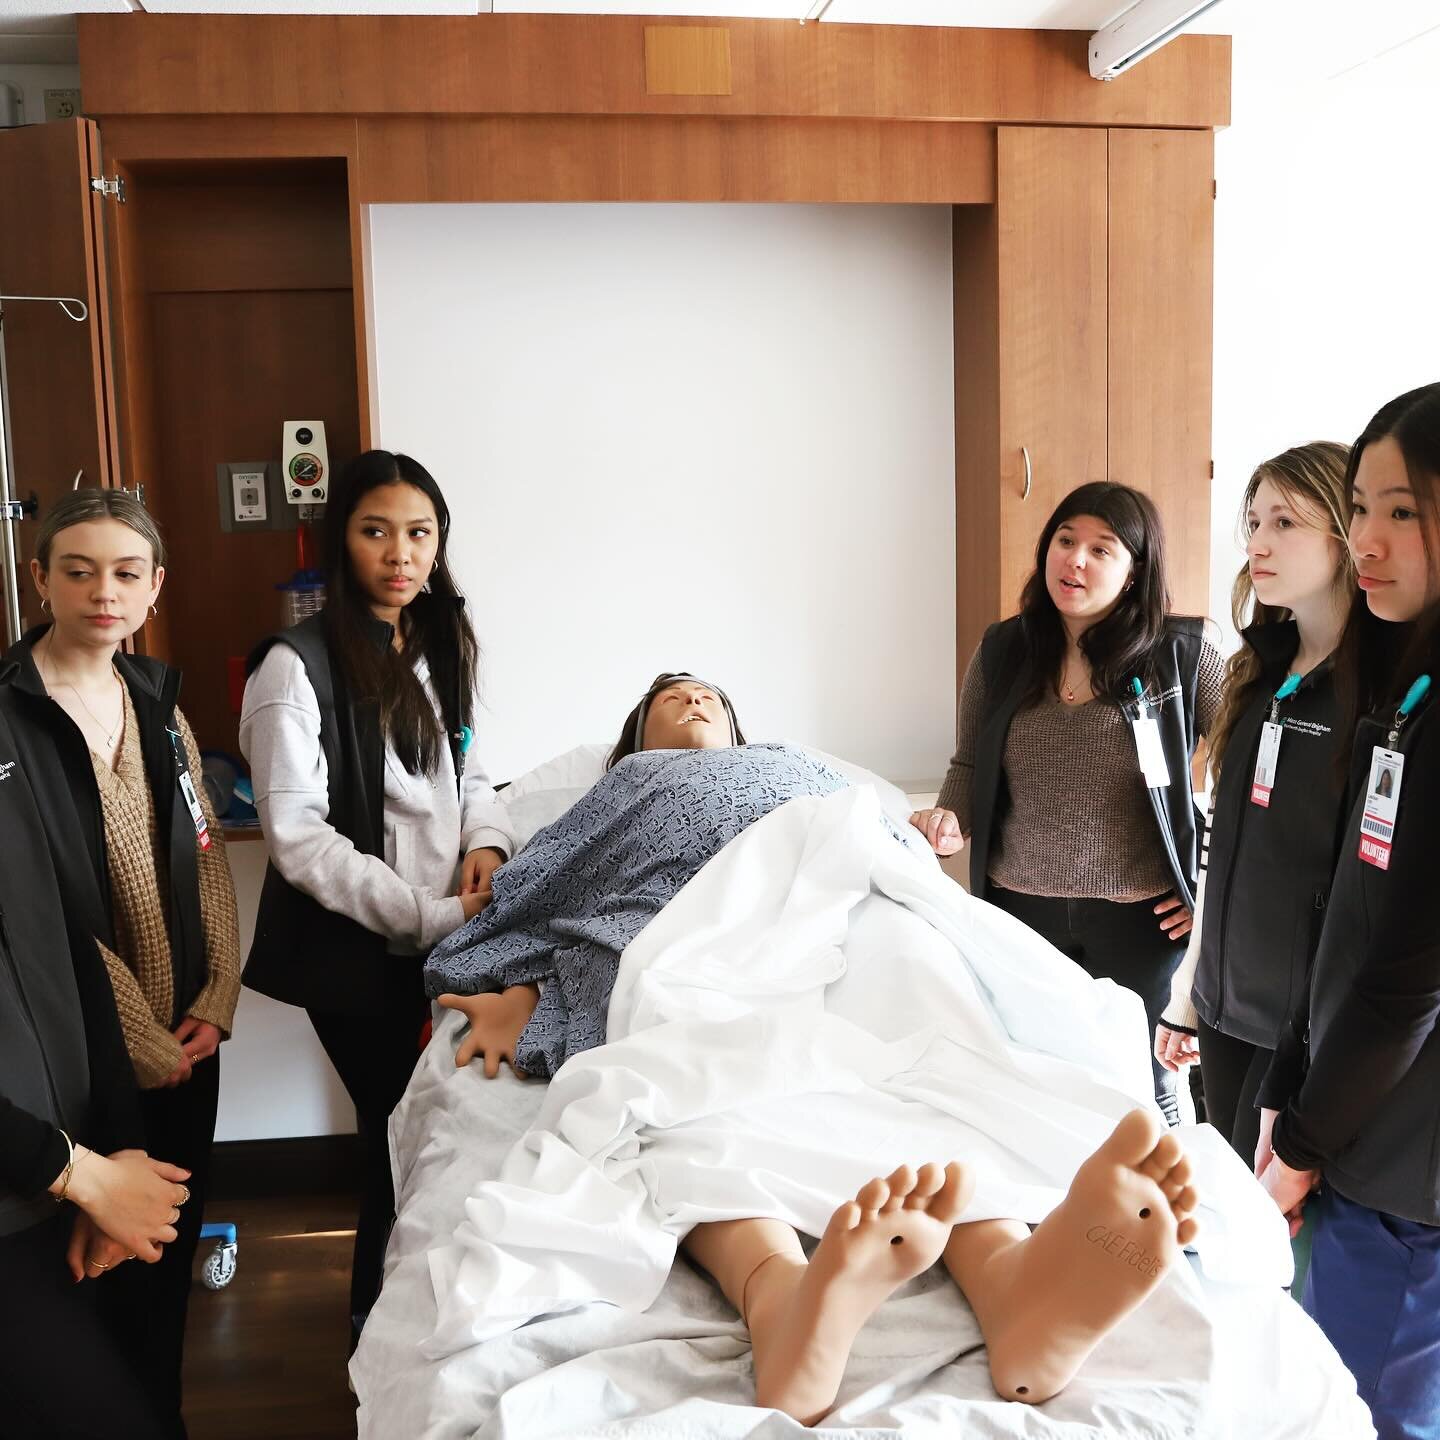 Had the pleasure of photographing this nursing internship class at WDH recently. Such a great new program connecting high school students with potential future opportunities in healthcare. ❤️ @jpaq1225 #lifestylephotography #lifestylephotographer #co